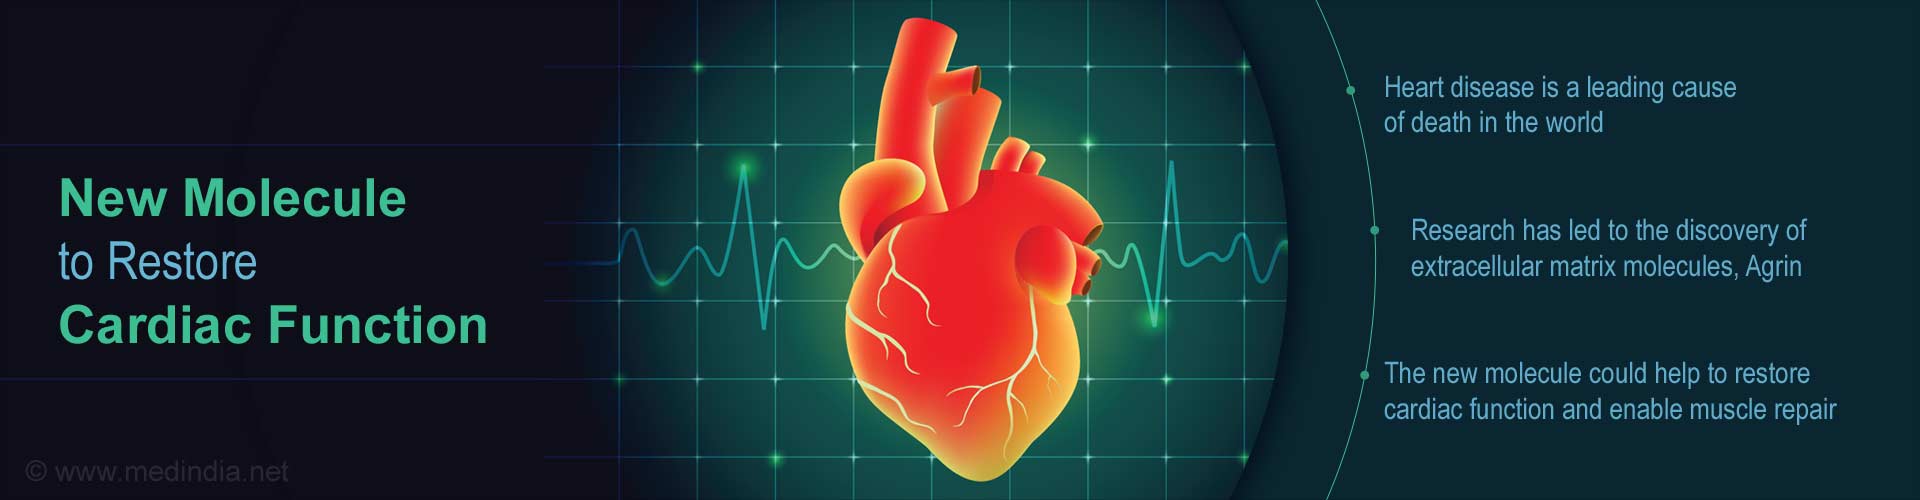 New Molecule to Restore Cardiac Function
- Heart disease is a leading cause of death in the world
- Research has led to the discovery of extracellular matrix molecules, Agrin
- The new molecule could help restore cardiac function and enable muscle repair